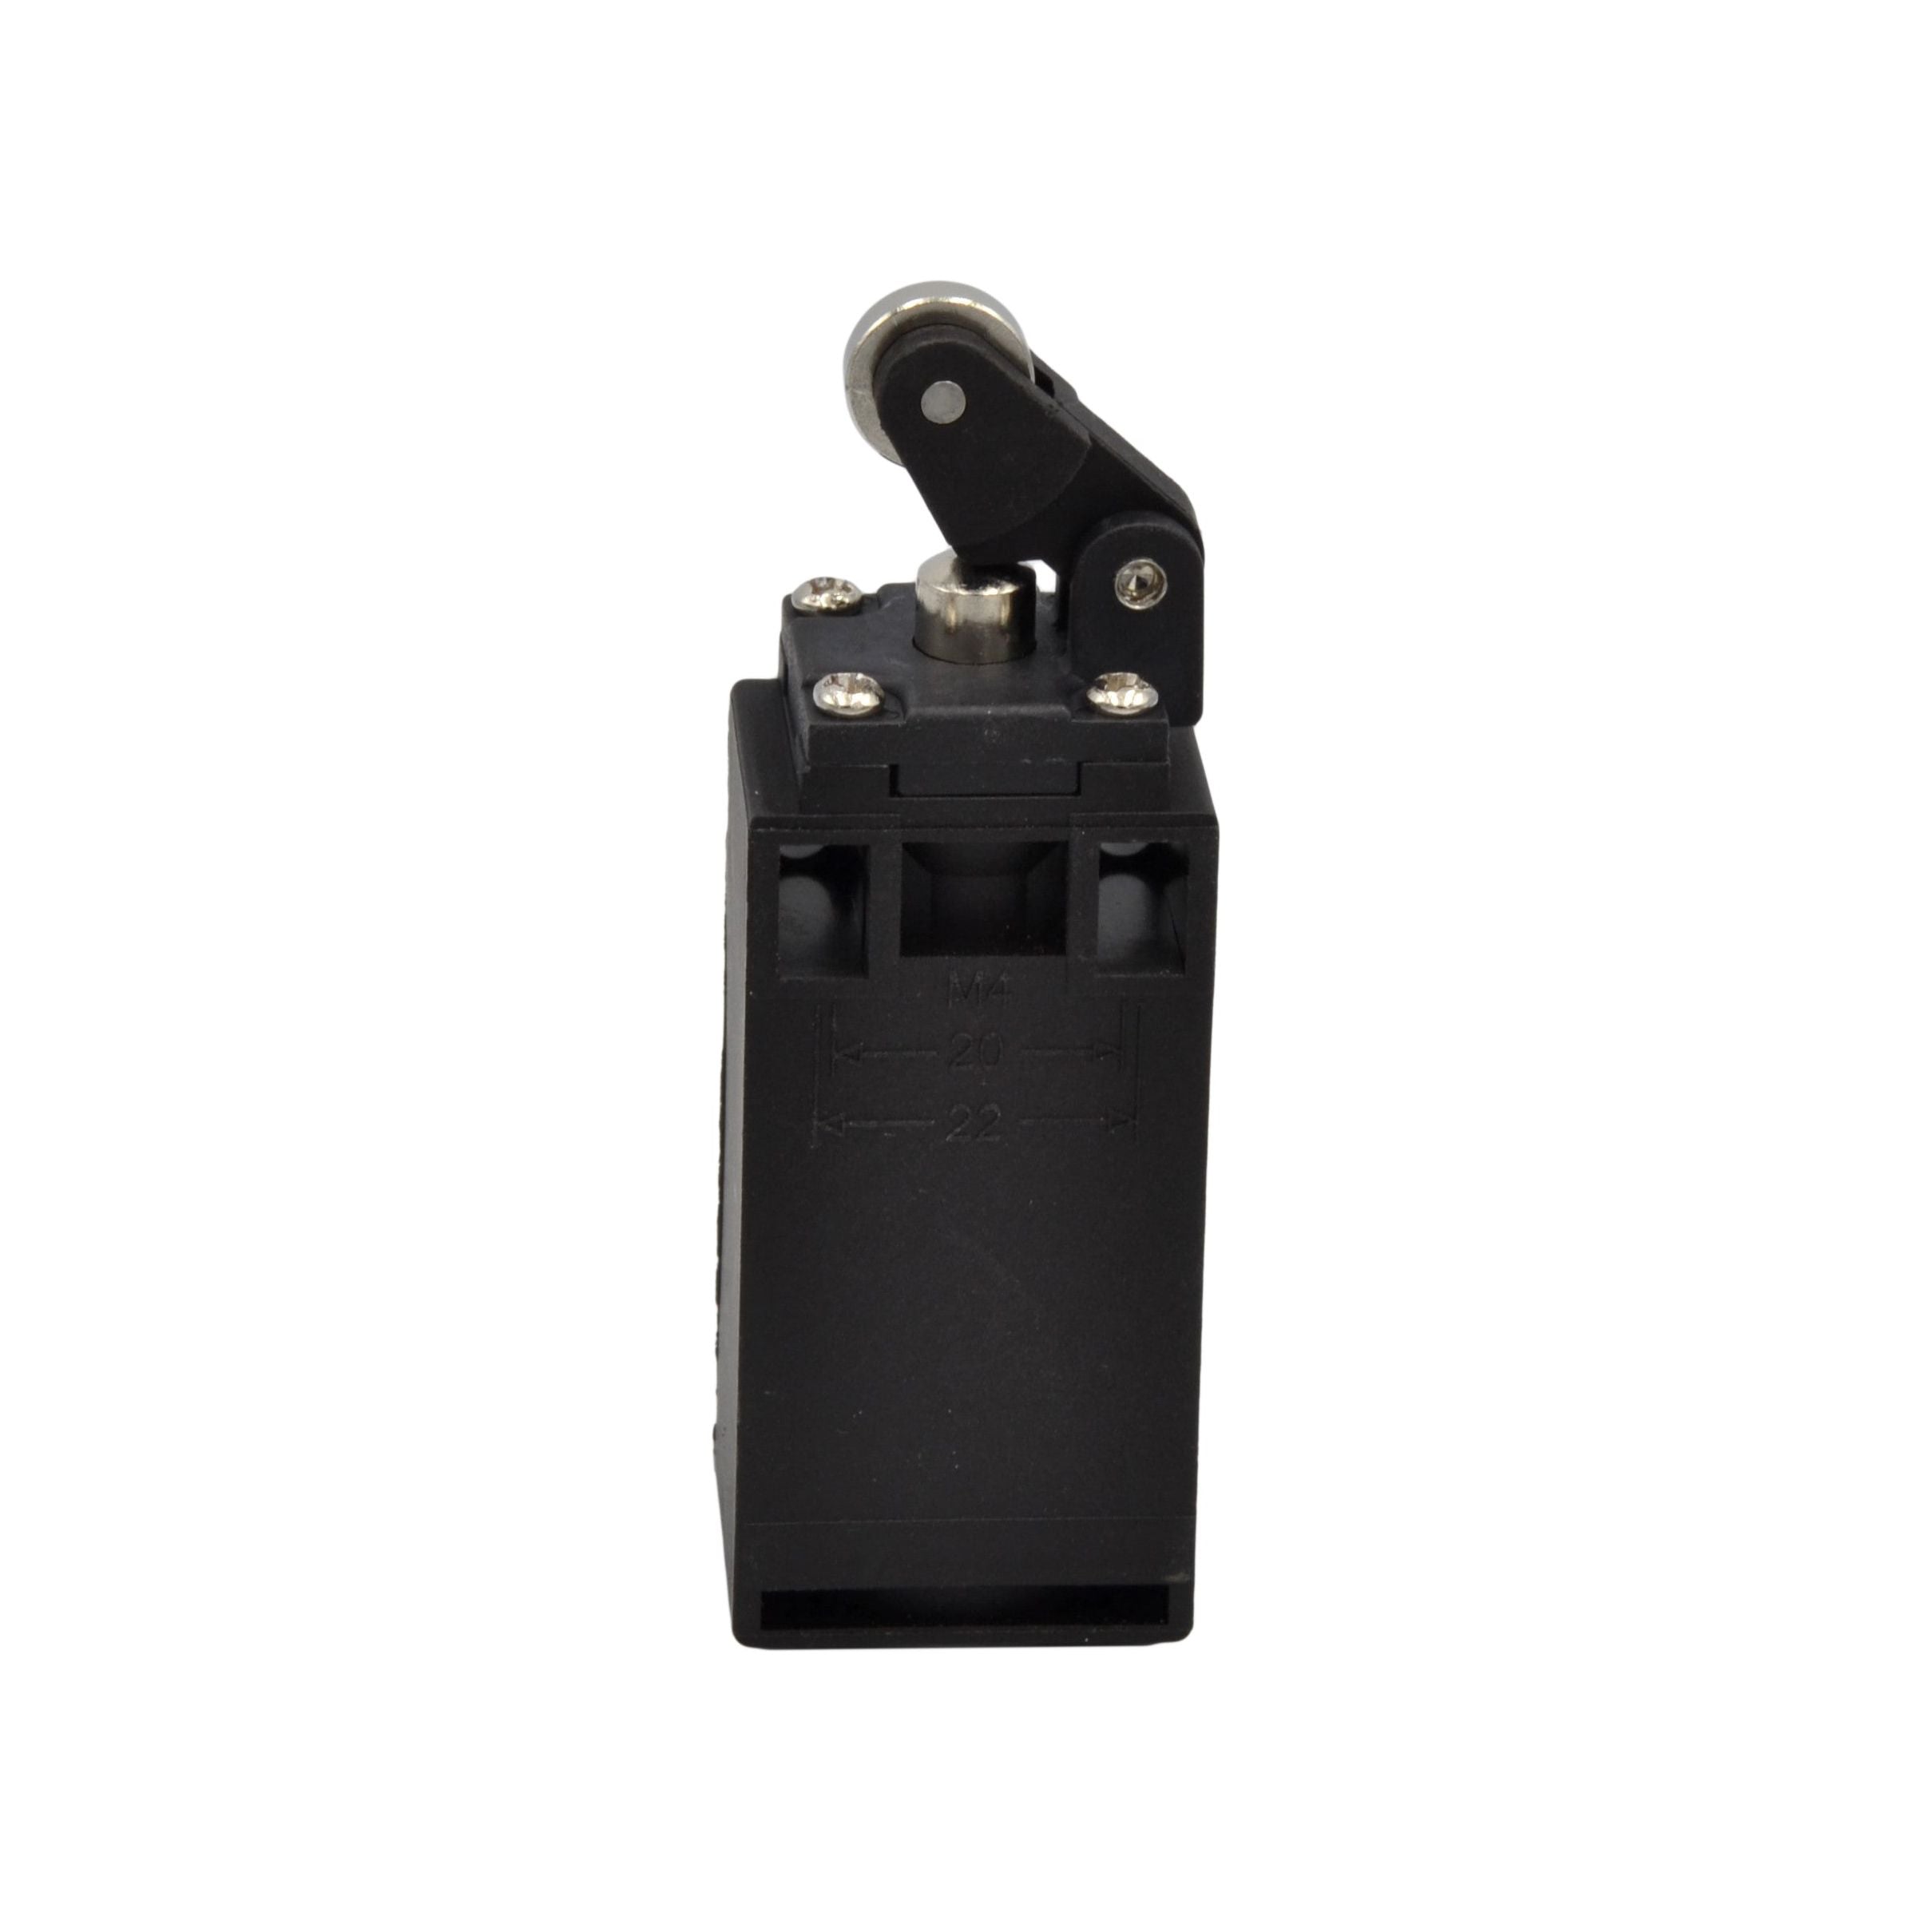 XCK-111 Side Roller Lever Limit Switch